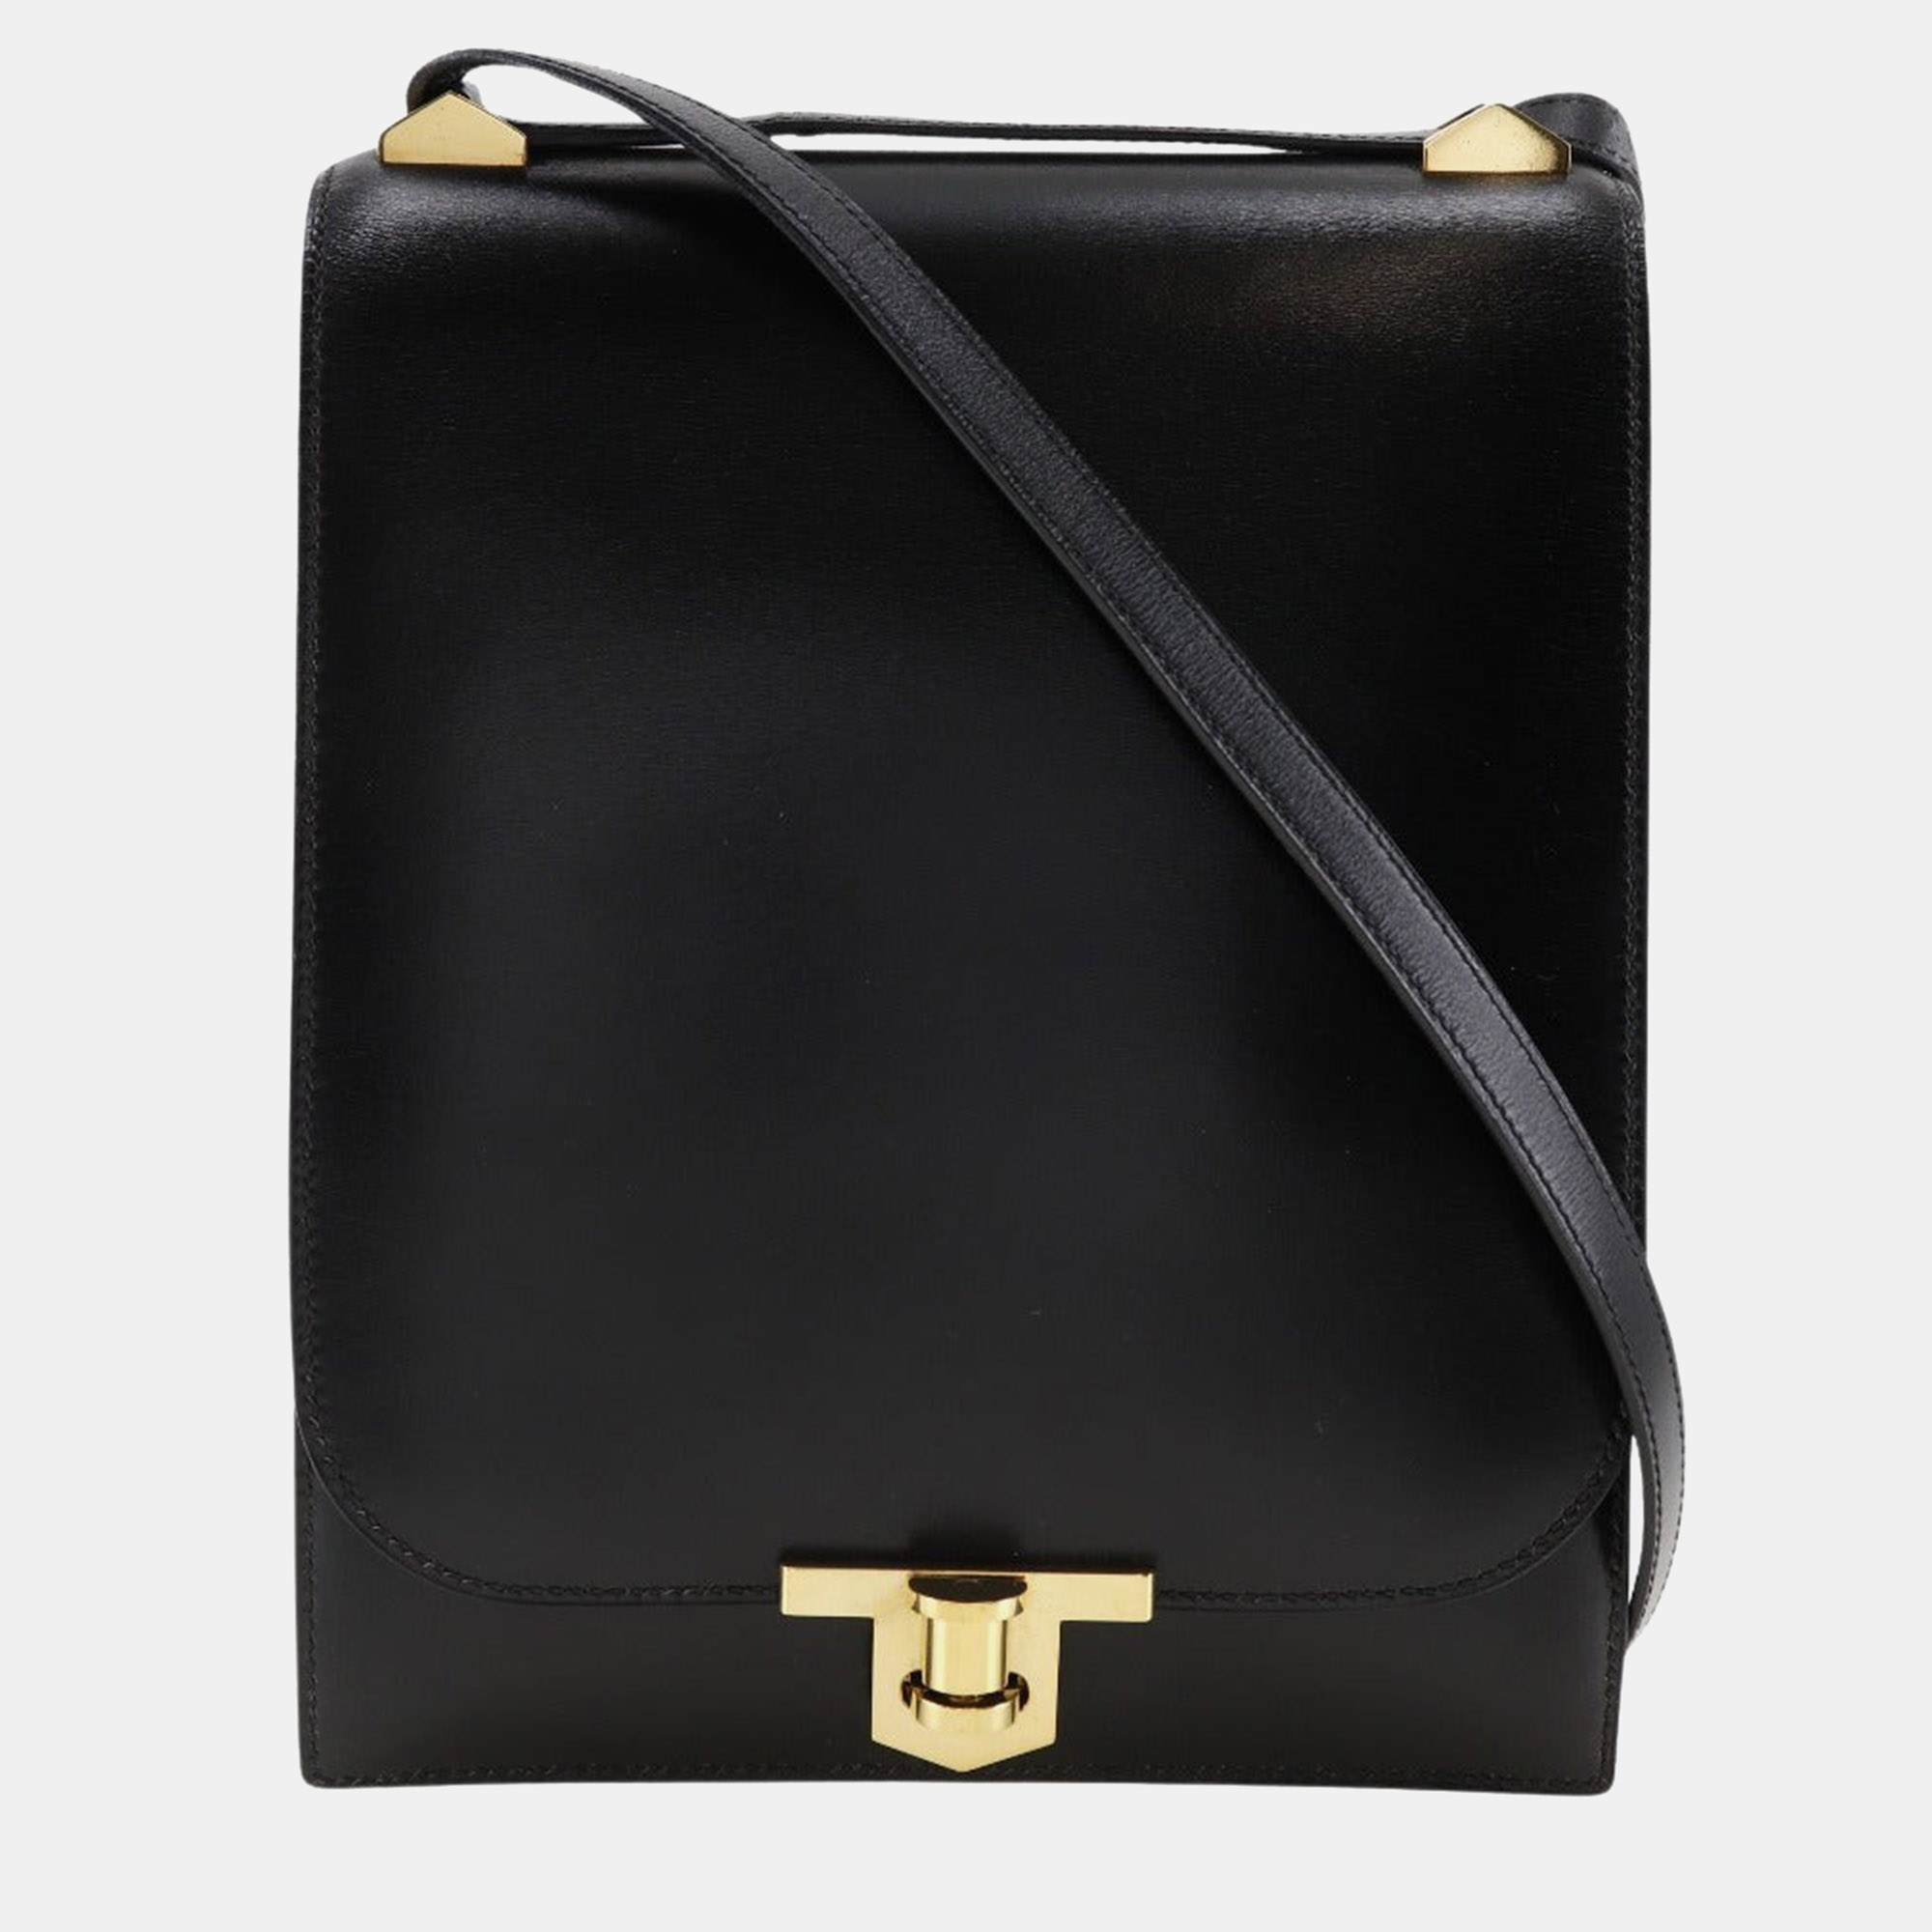 Hermes black leather chaine d'ancre bag